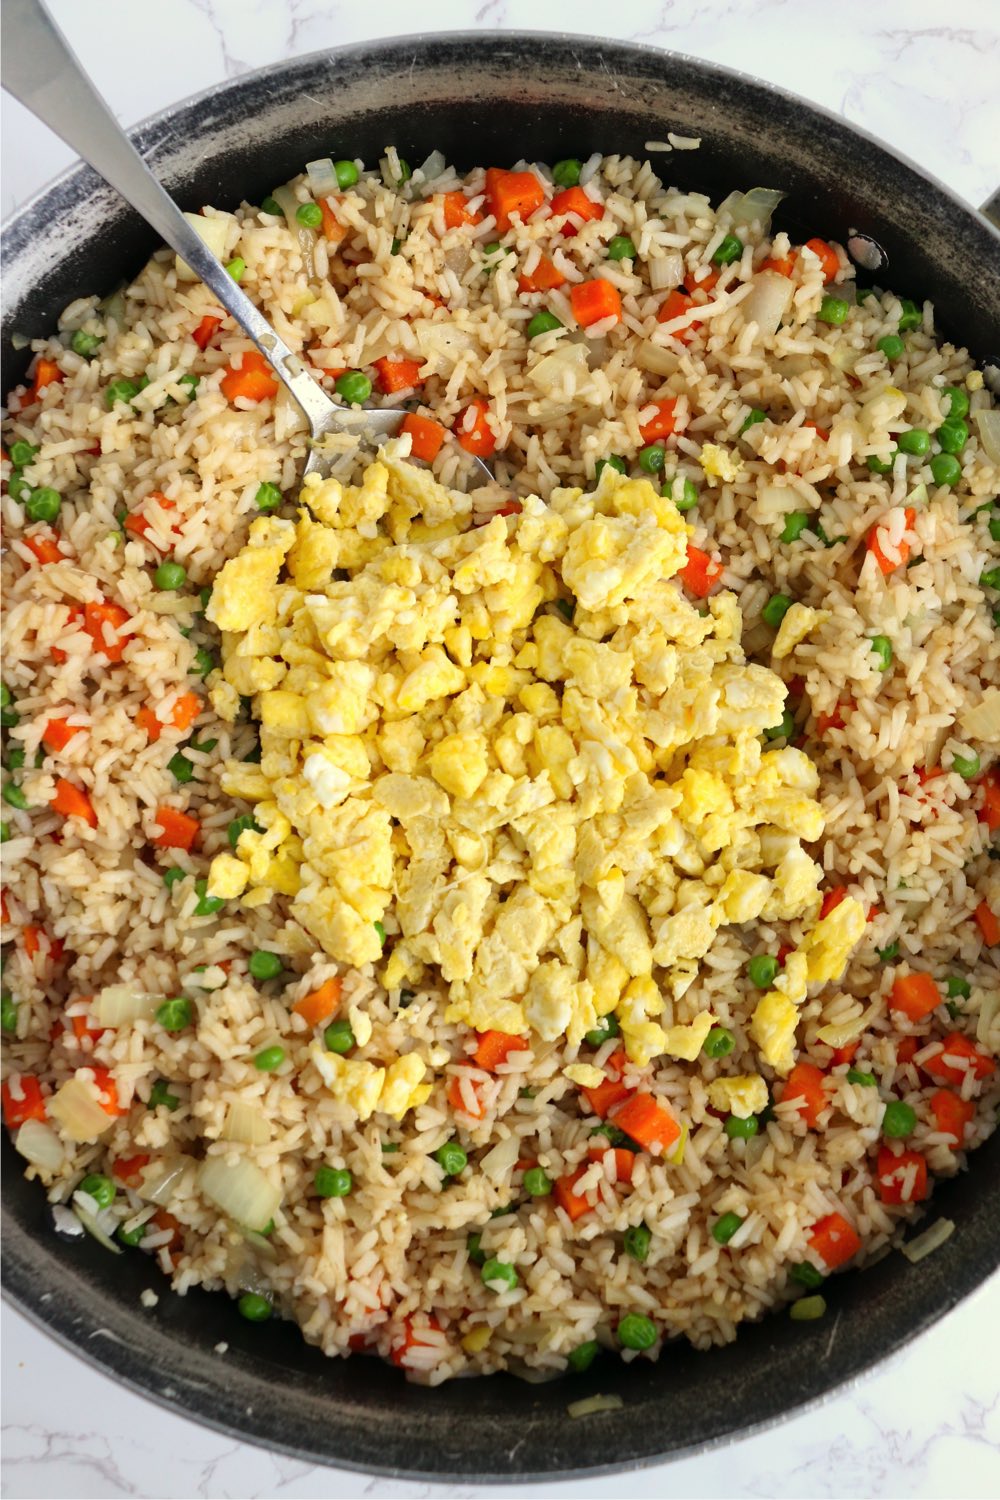 Adding scrambled eggs to fried rice